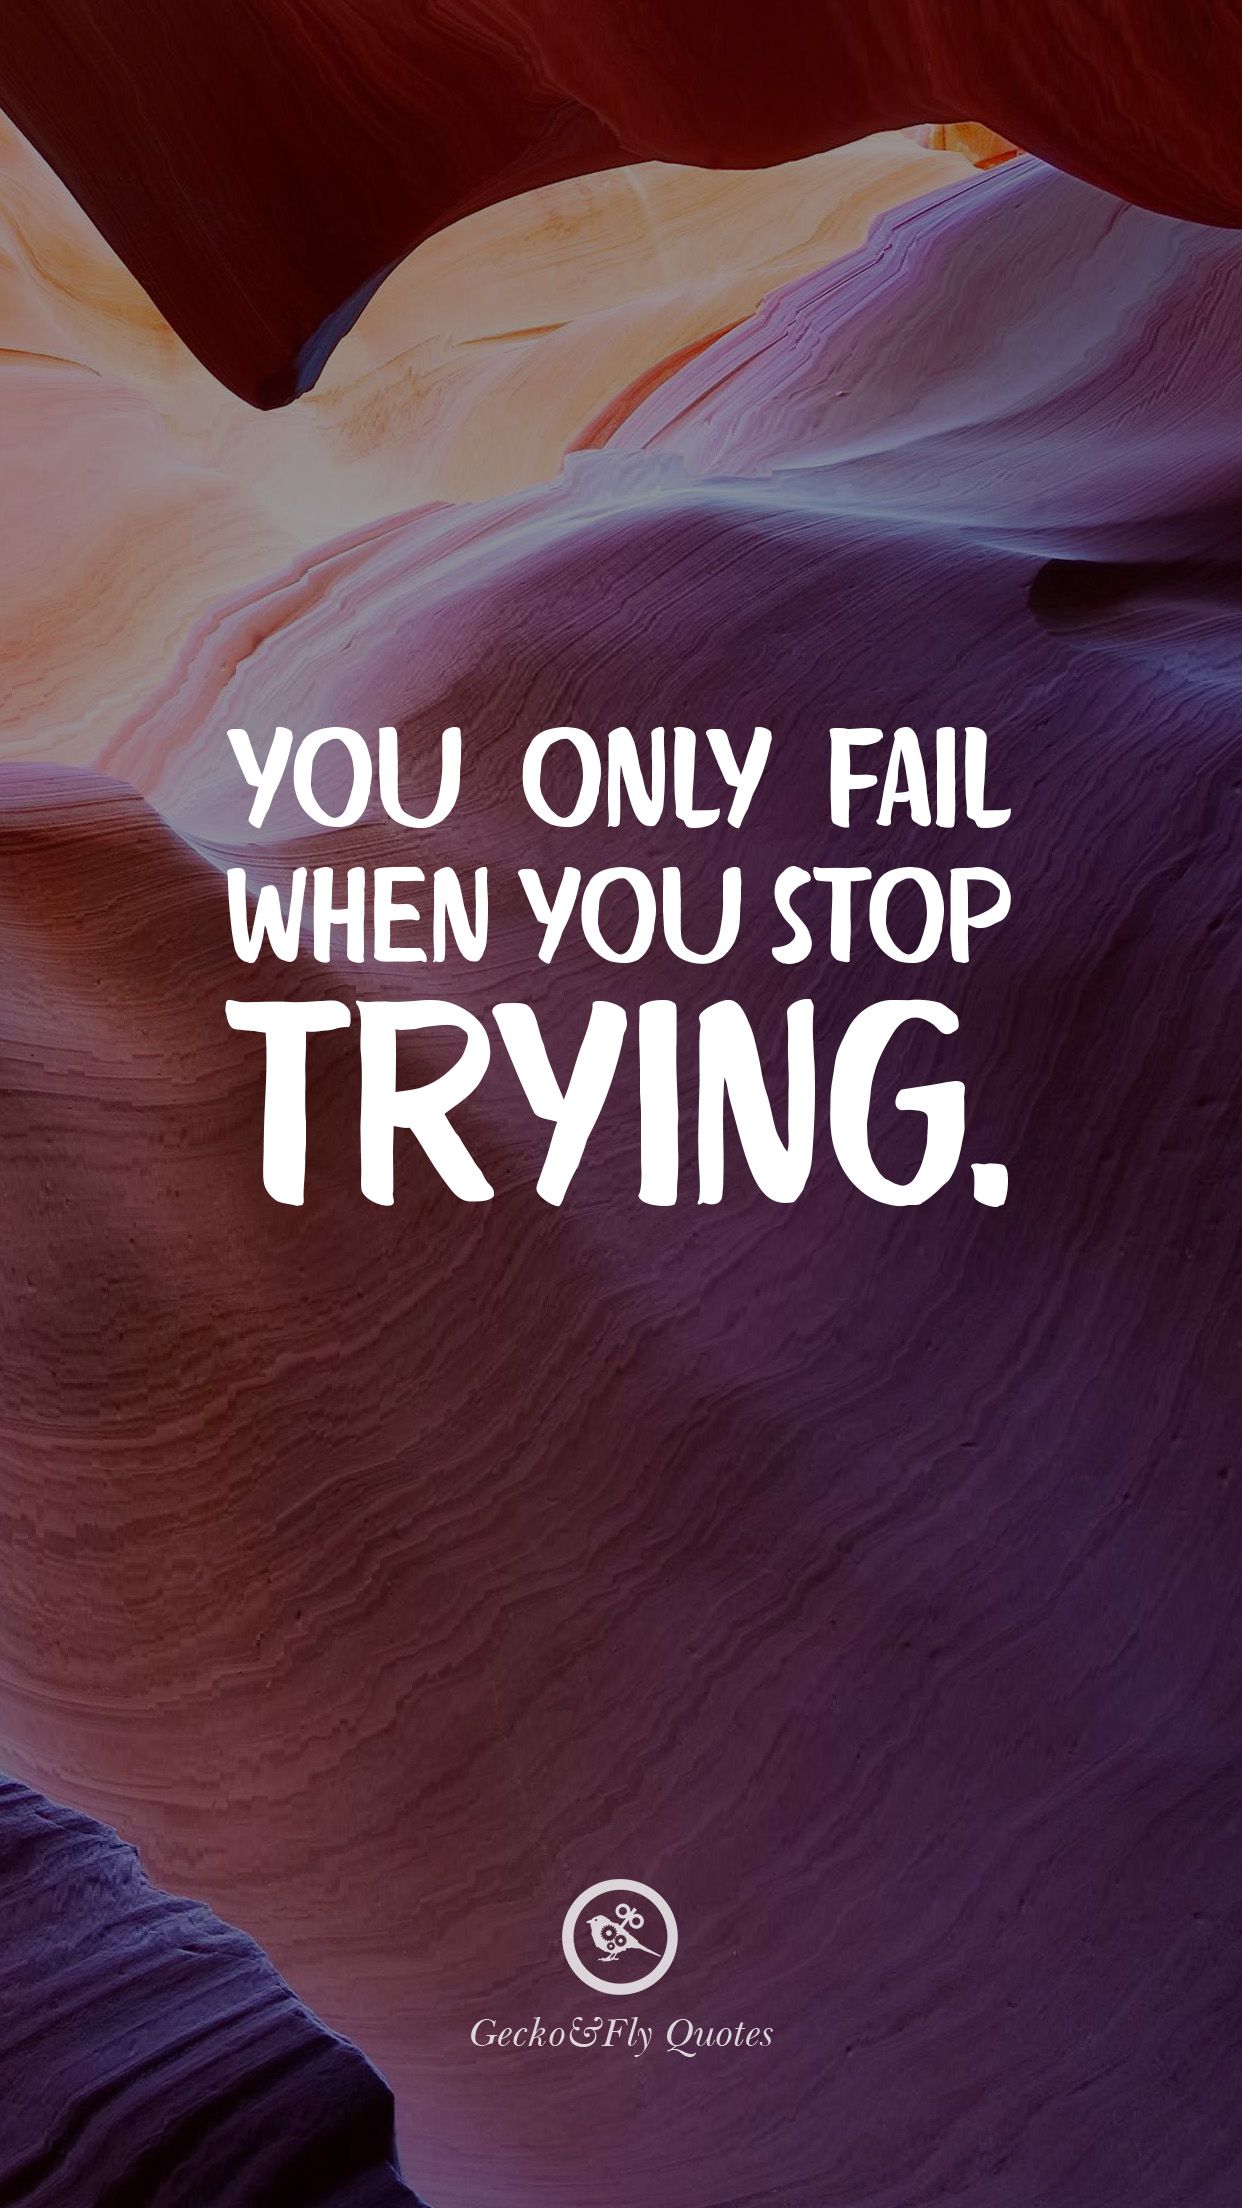 You Only Fail When You Stop Trying Quotes - HD Wallpaper 